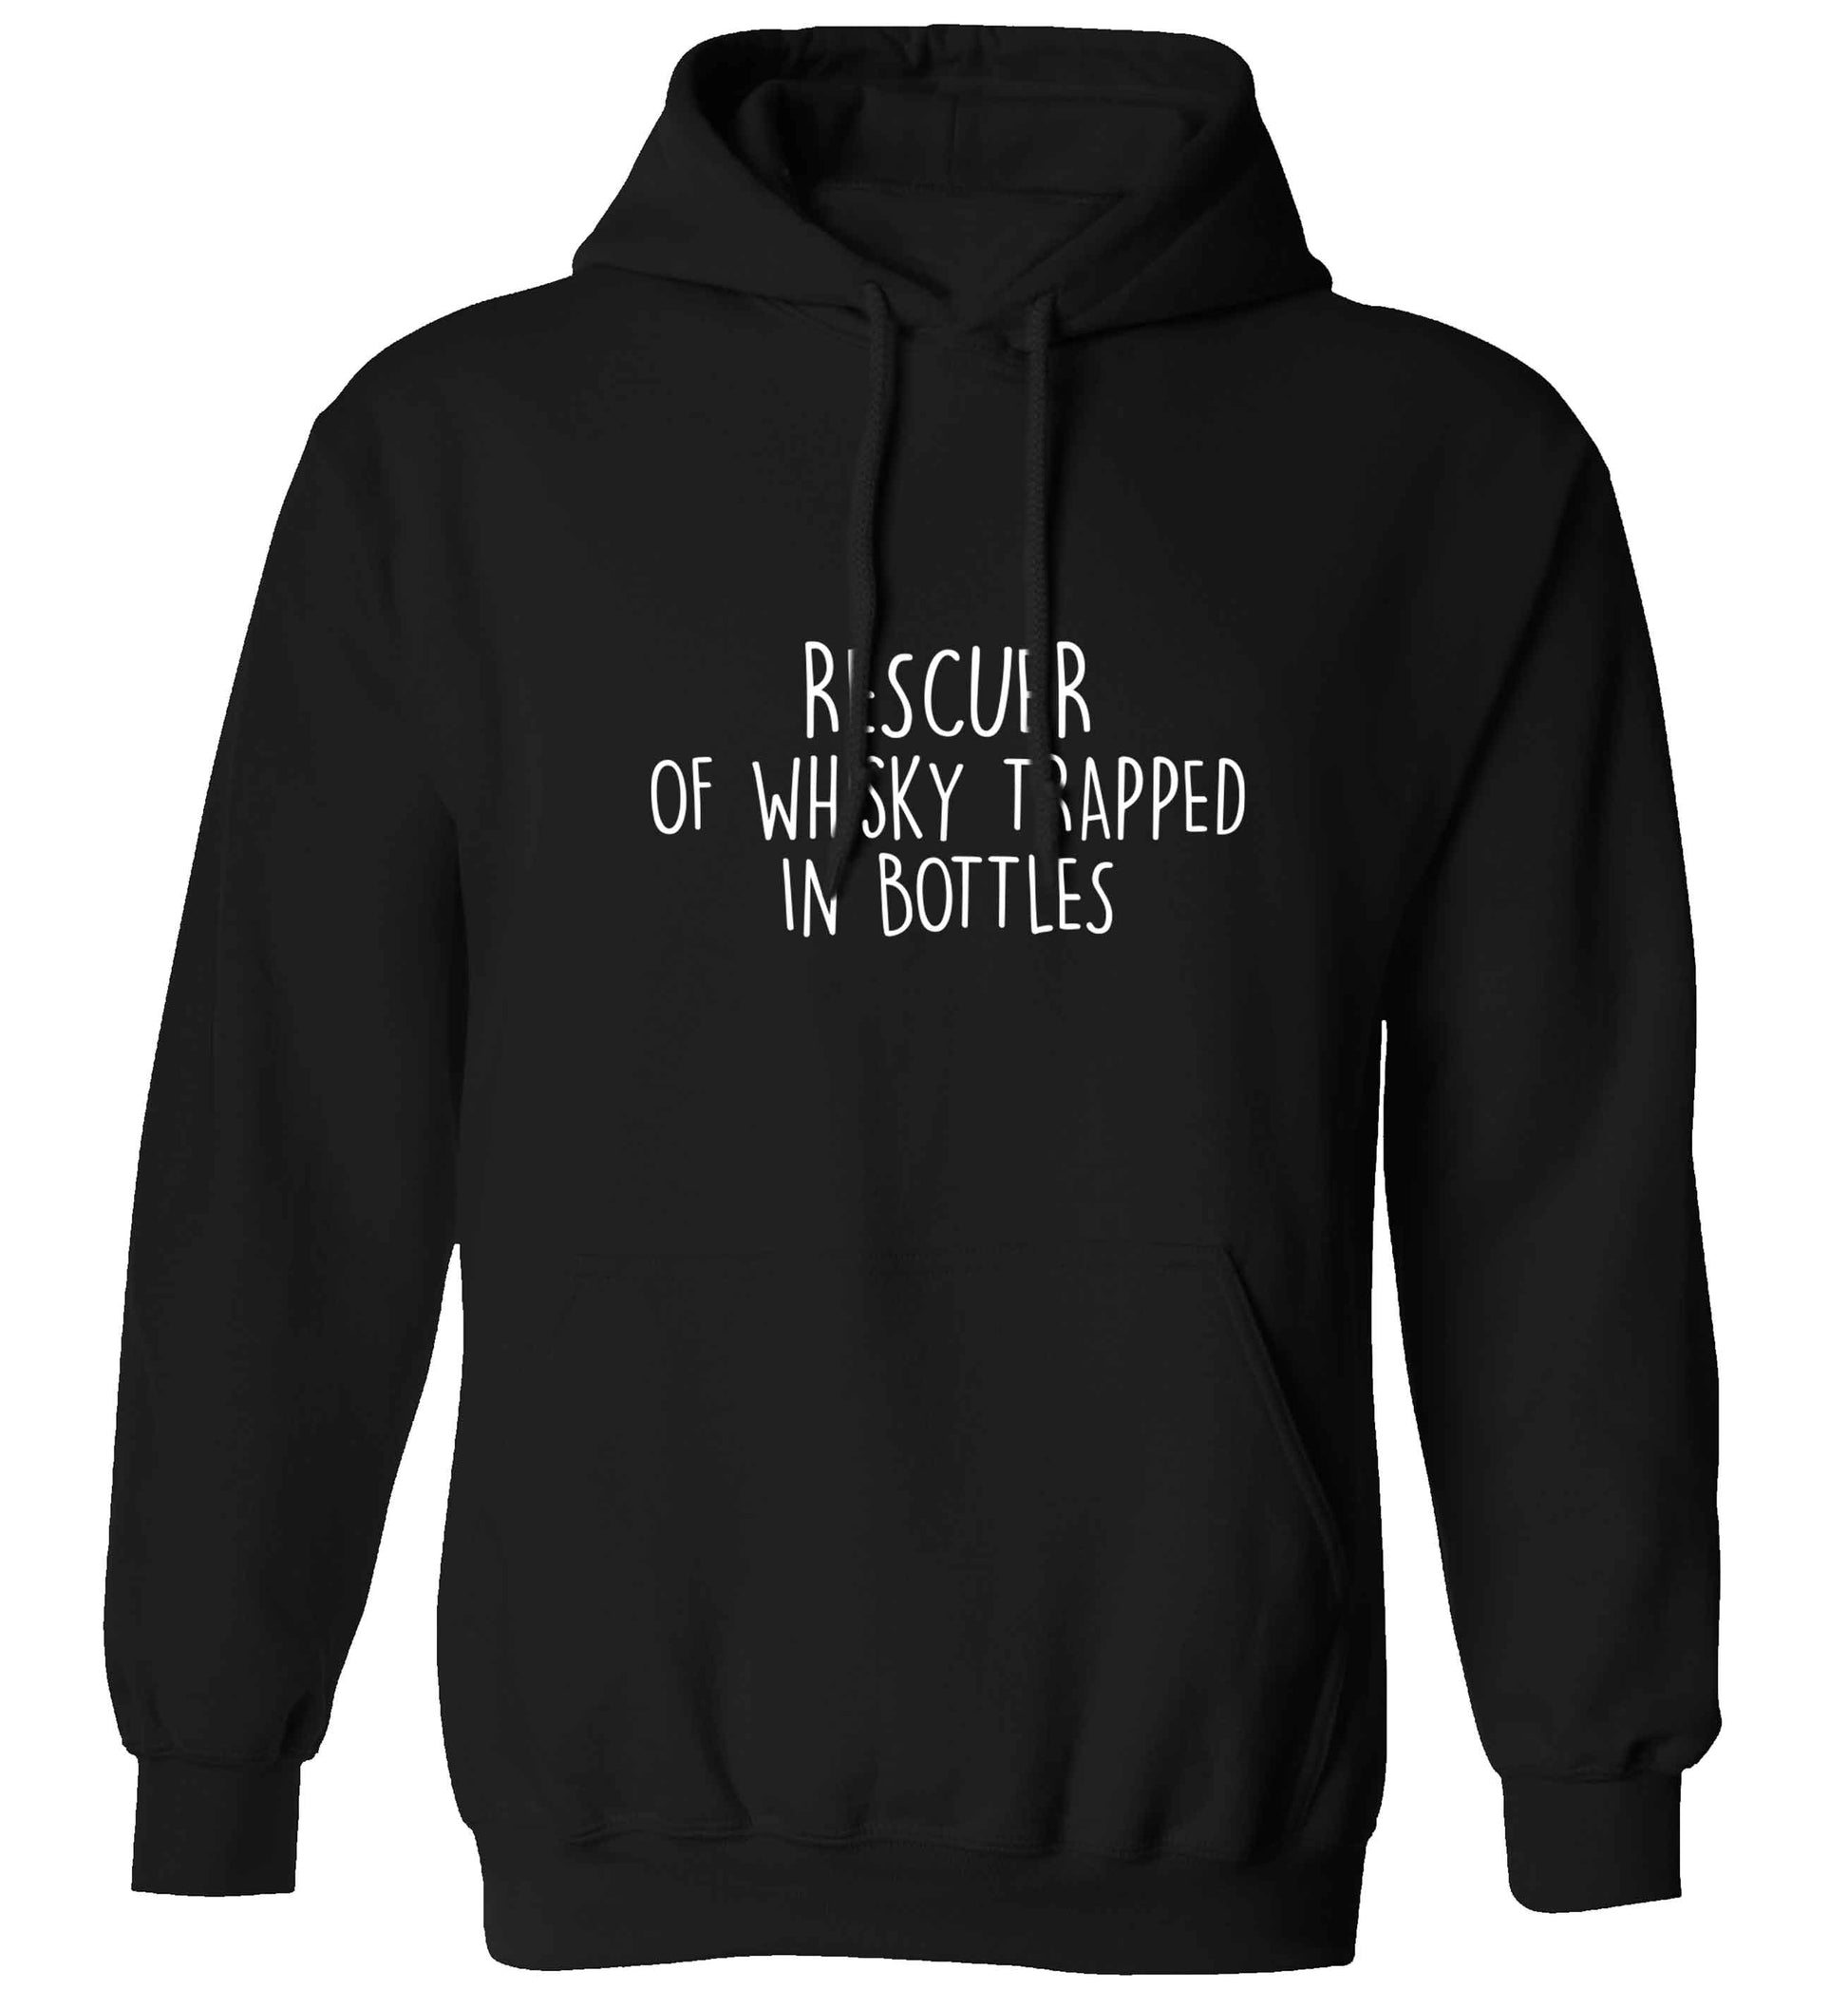 Rescuer of whisky trapped in bottles adults unisex black hoodie 2XL